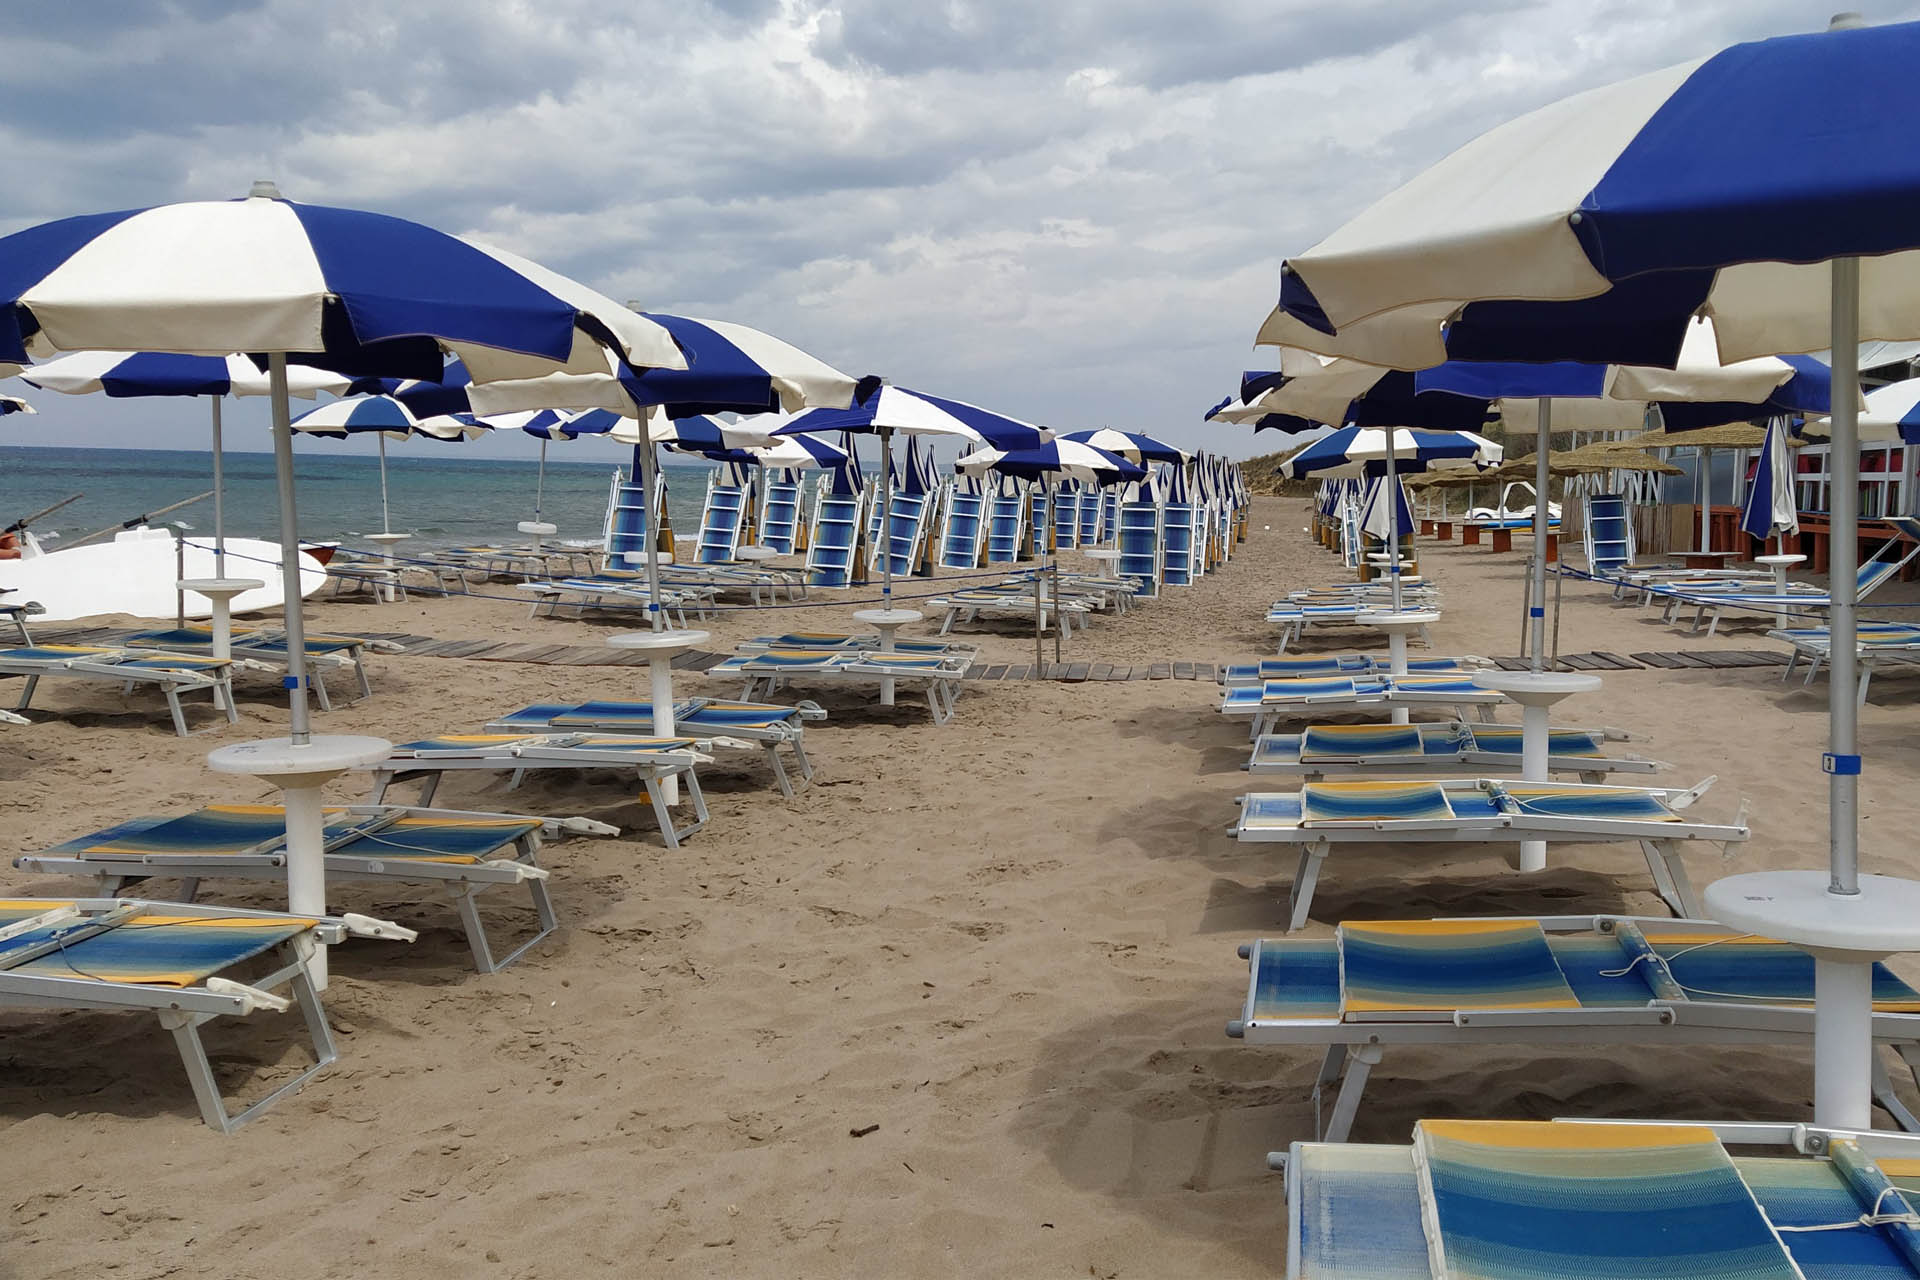 Spiagge